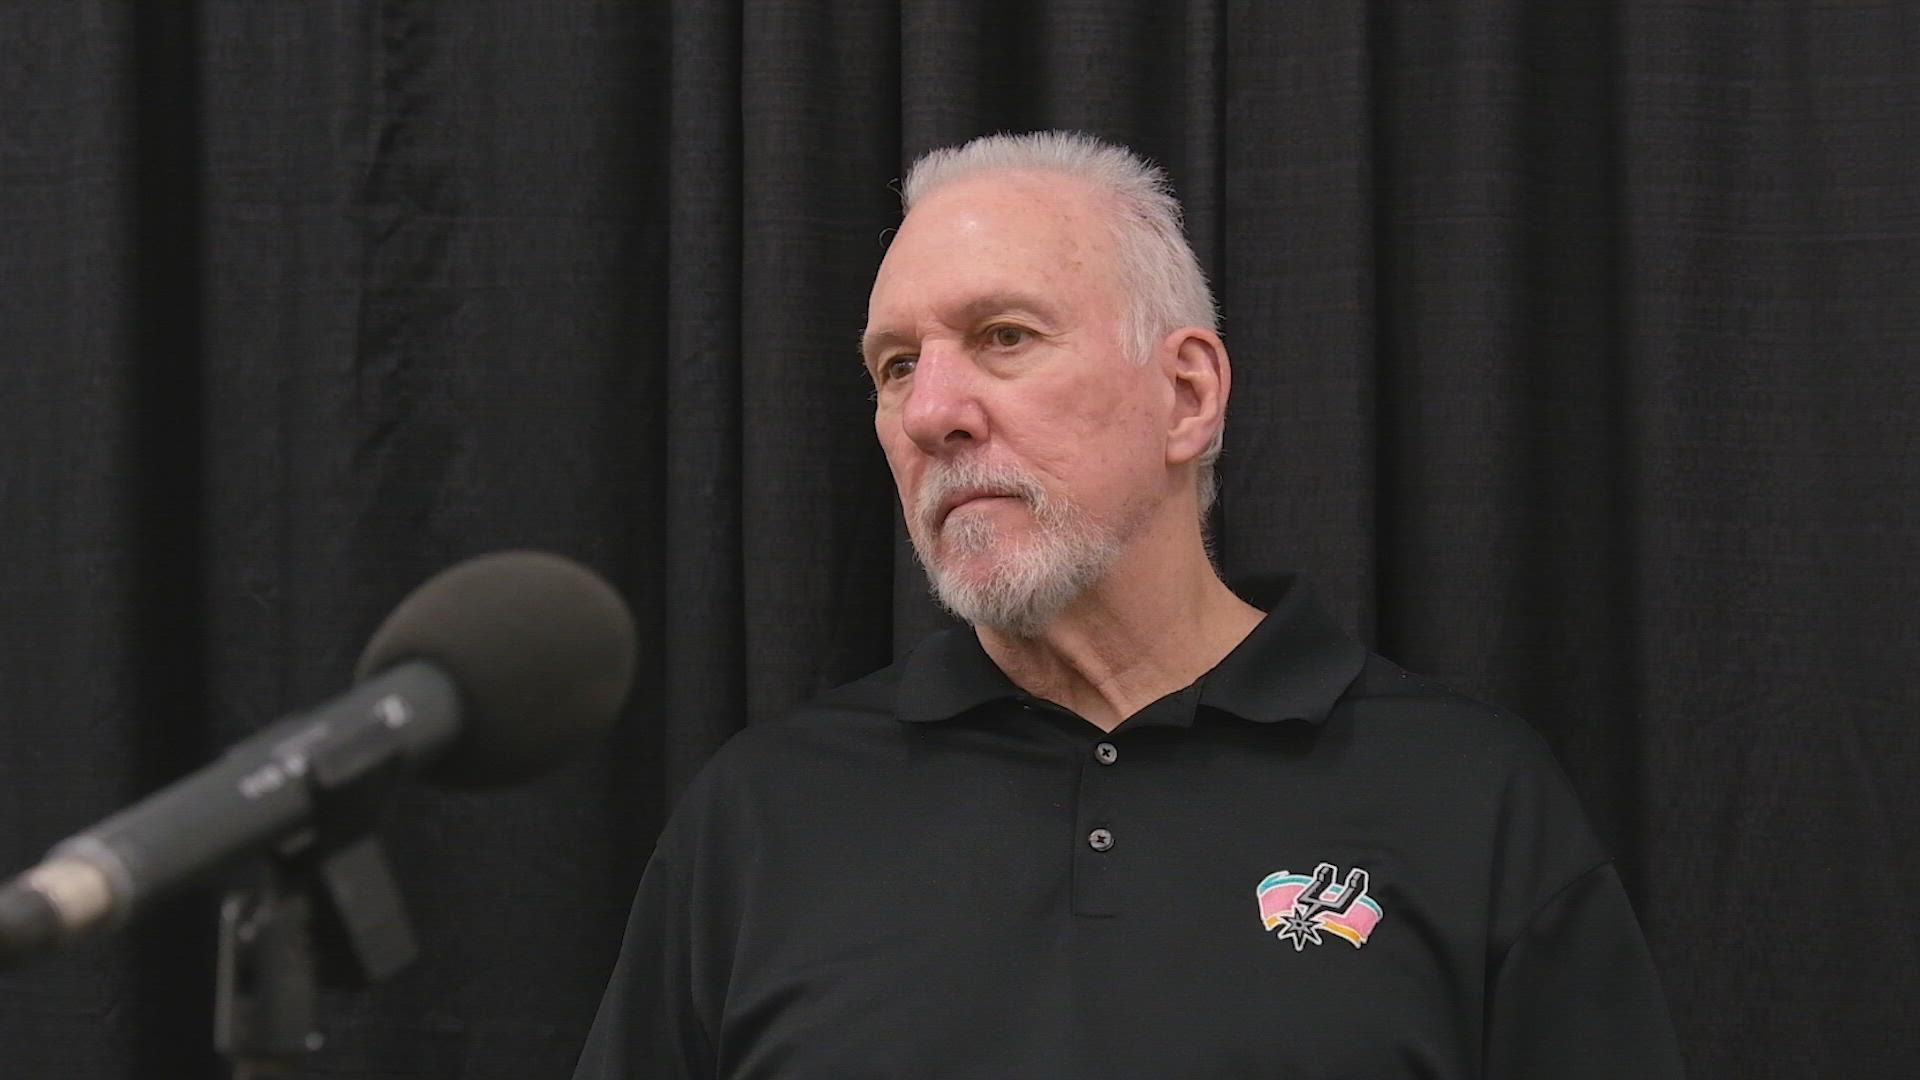 "I’m thrilled with how we played," Pop said. "Watched our mistakes down the stretch that a young team is going to make, in an effort to get smarter."